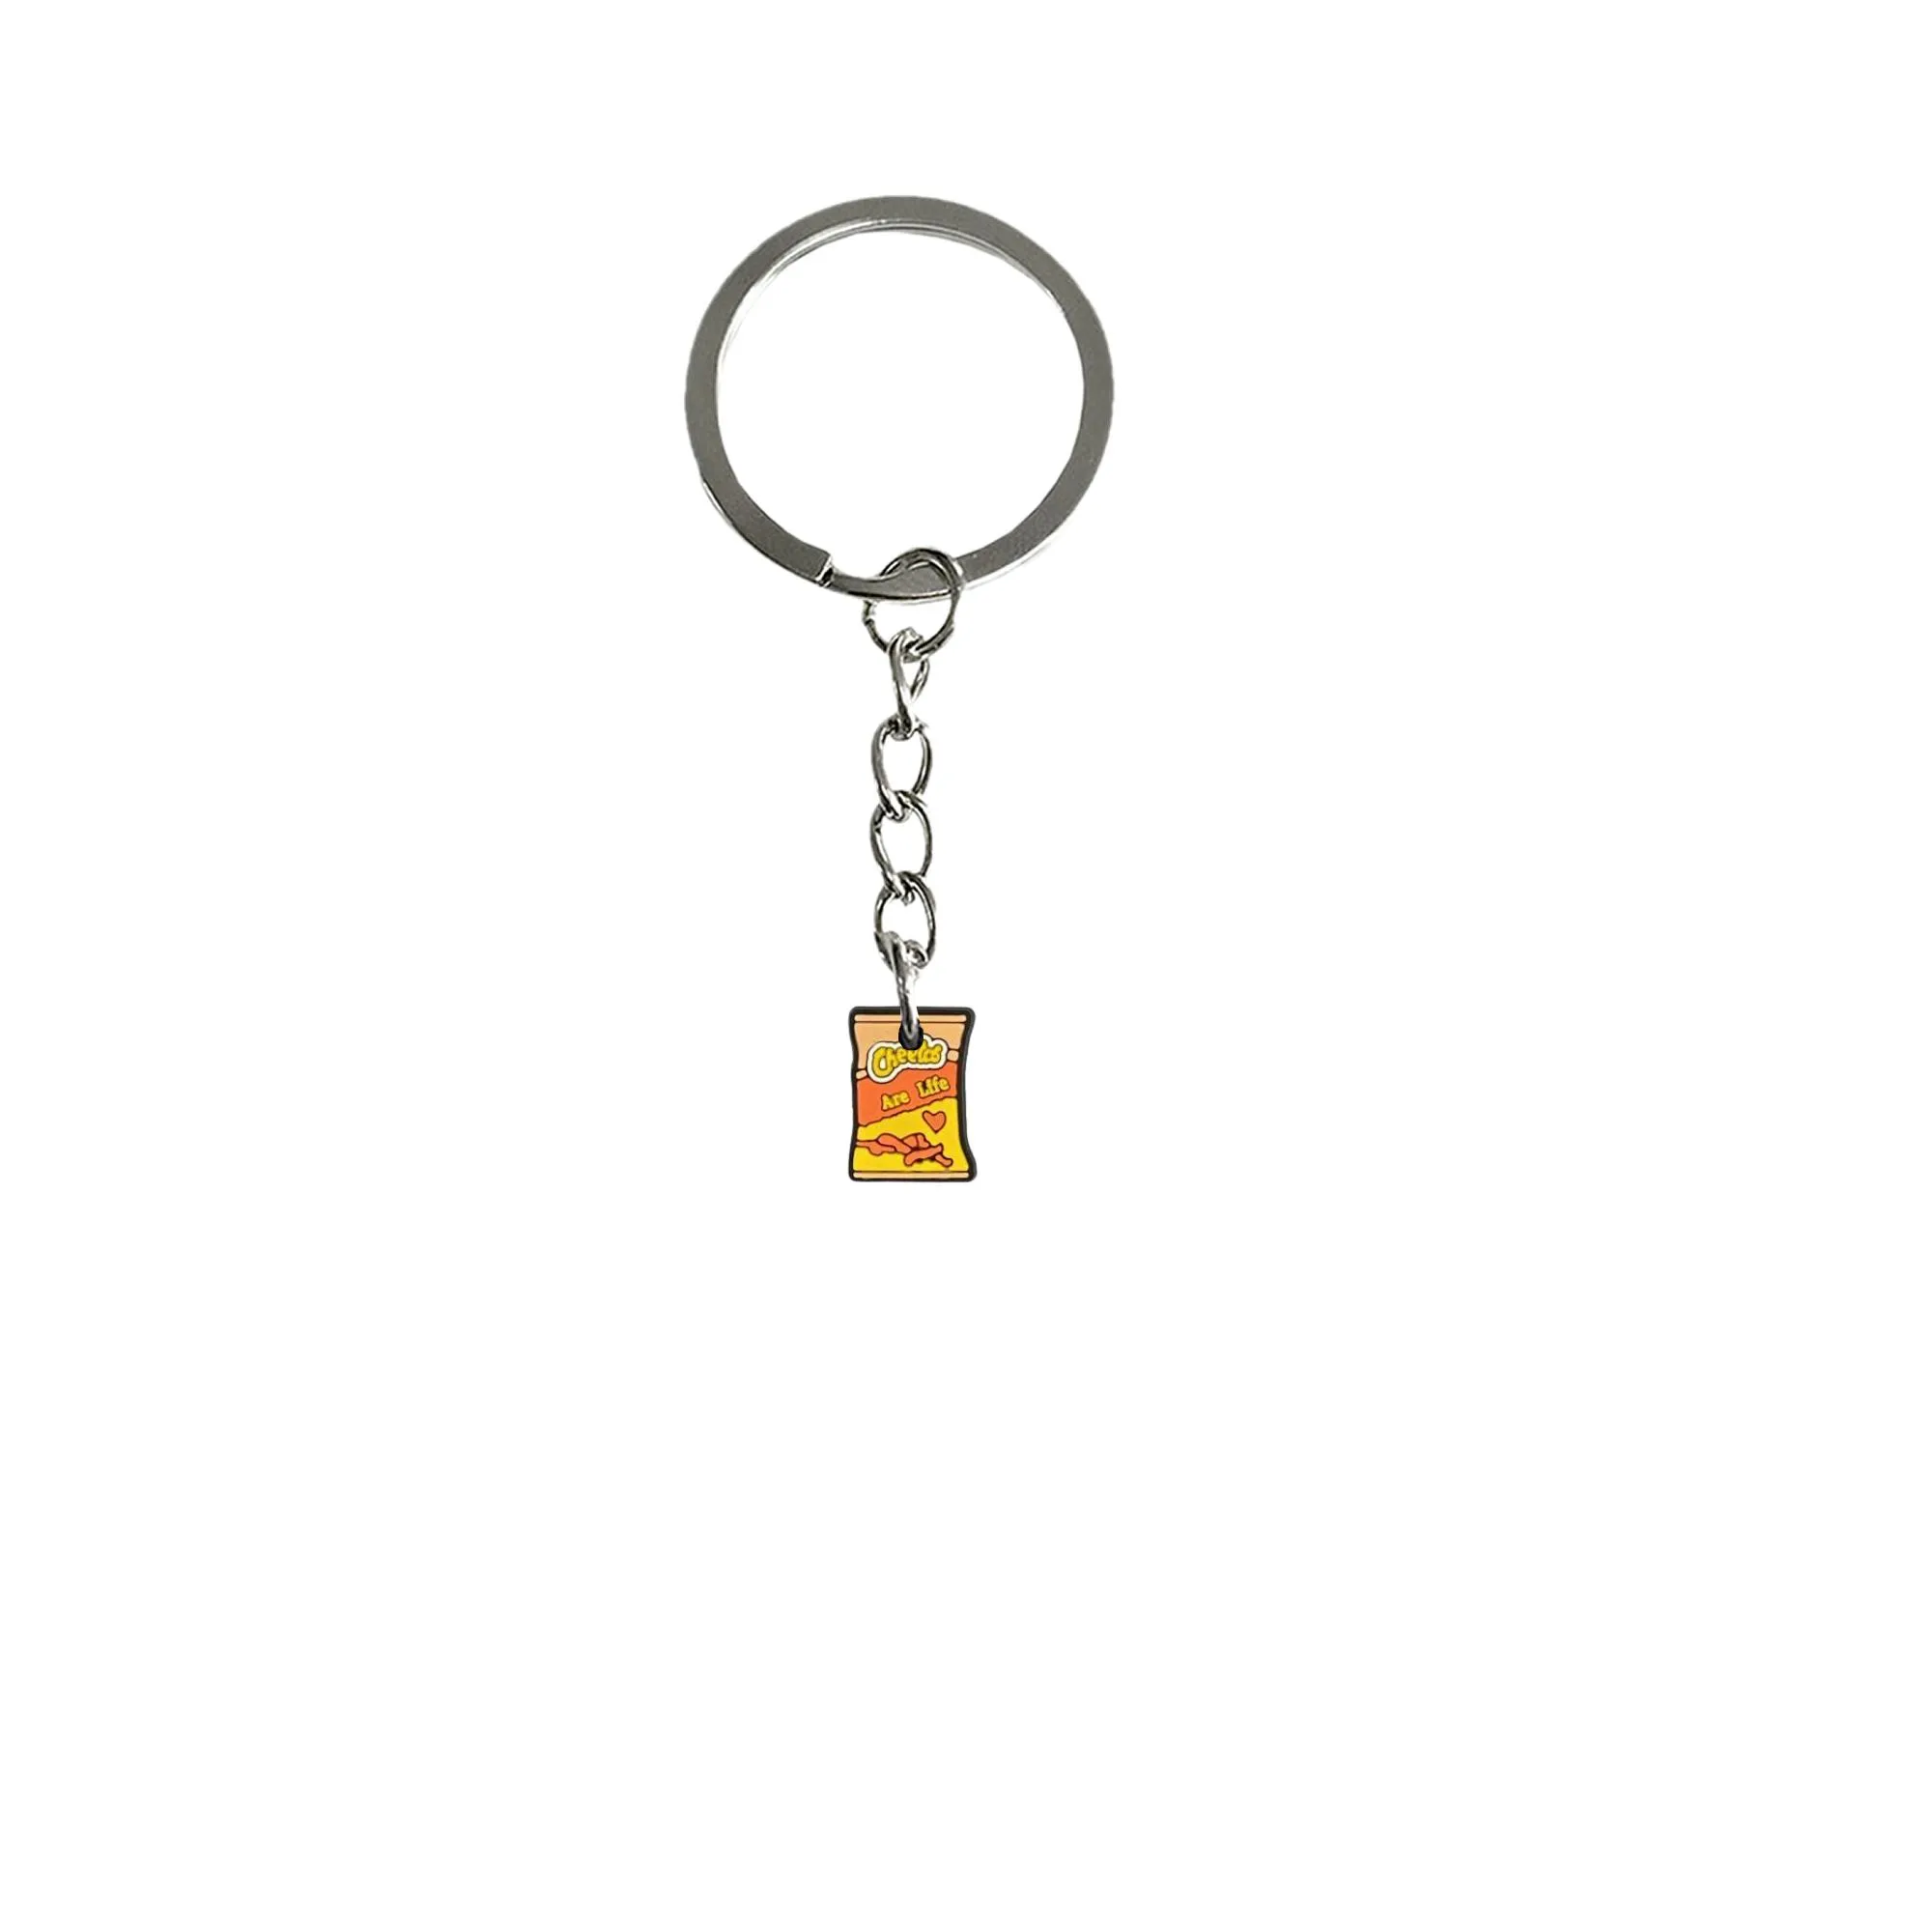 fule chicken keychain key rings mini cute keyring for classroom prizes school bags backpack suitable schoolbag keychains day birthday party supplies gift couple chains women ring girls